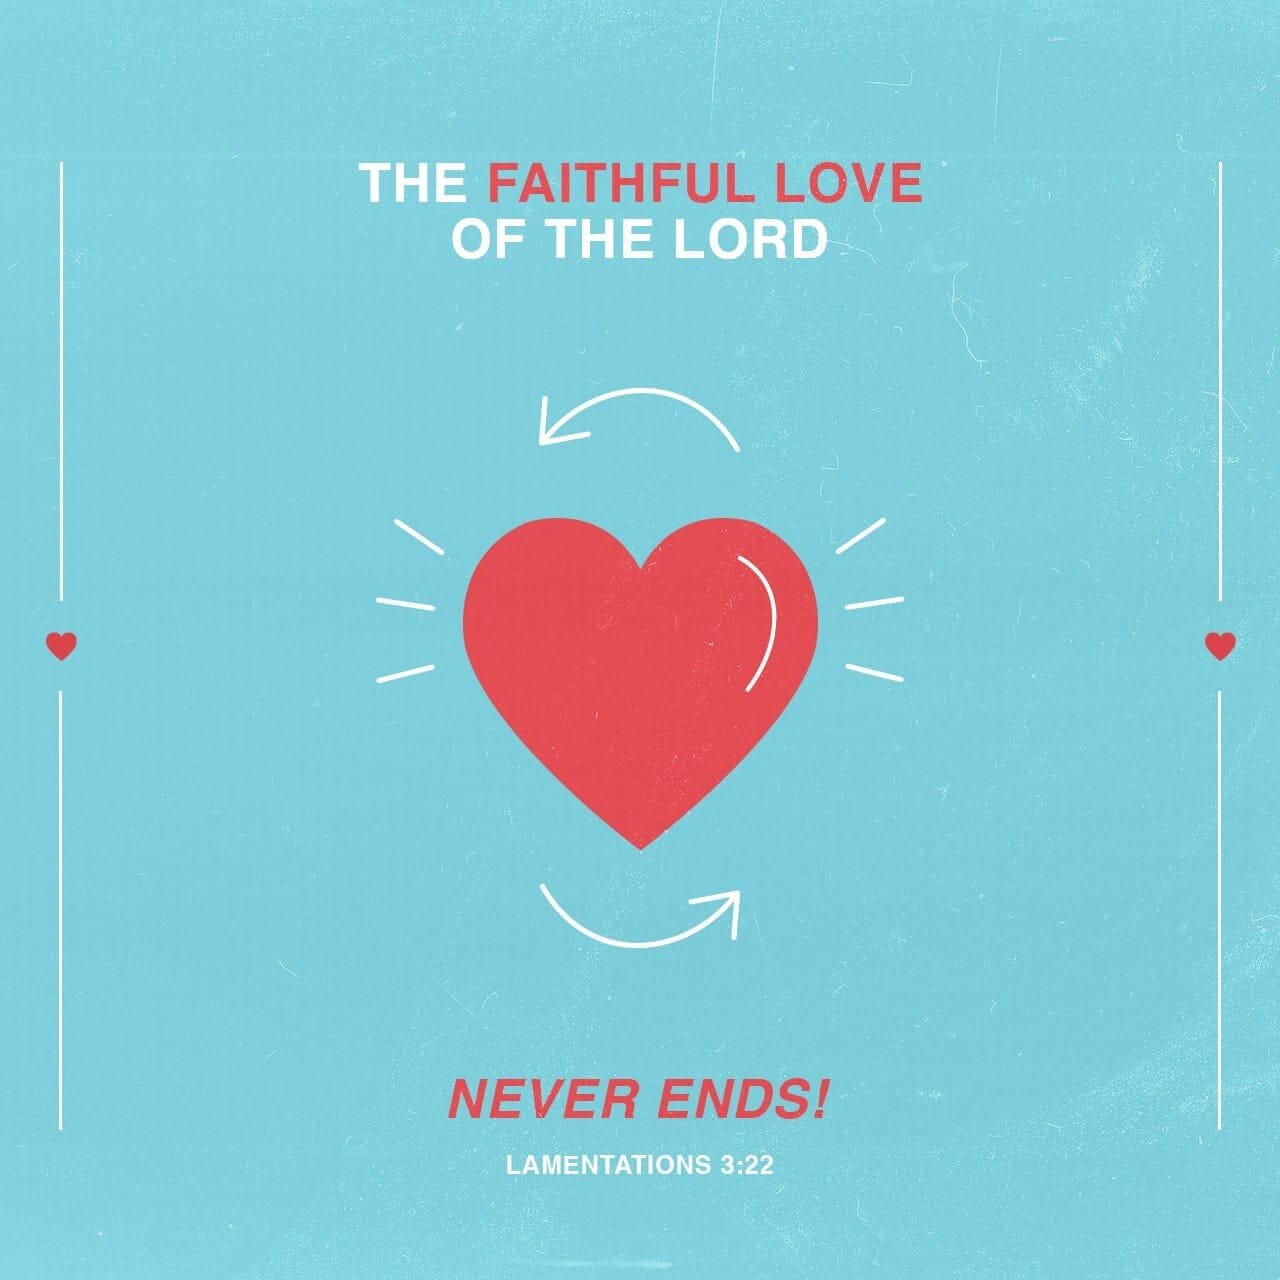 Struggling today? This week? This year? Hold tight - God's love for YOU  is never ending &quot;Because of the Lord&rsquo;s great love we are not consumed,
 for his compassions never fail. They are new every morning;
 great is your faithfulness.&quot;